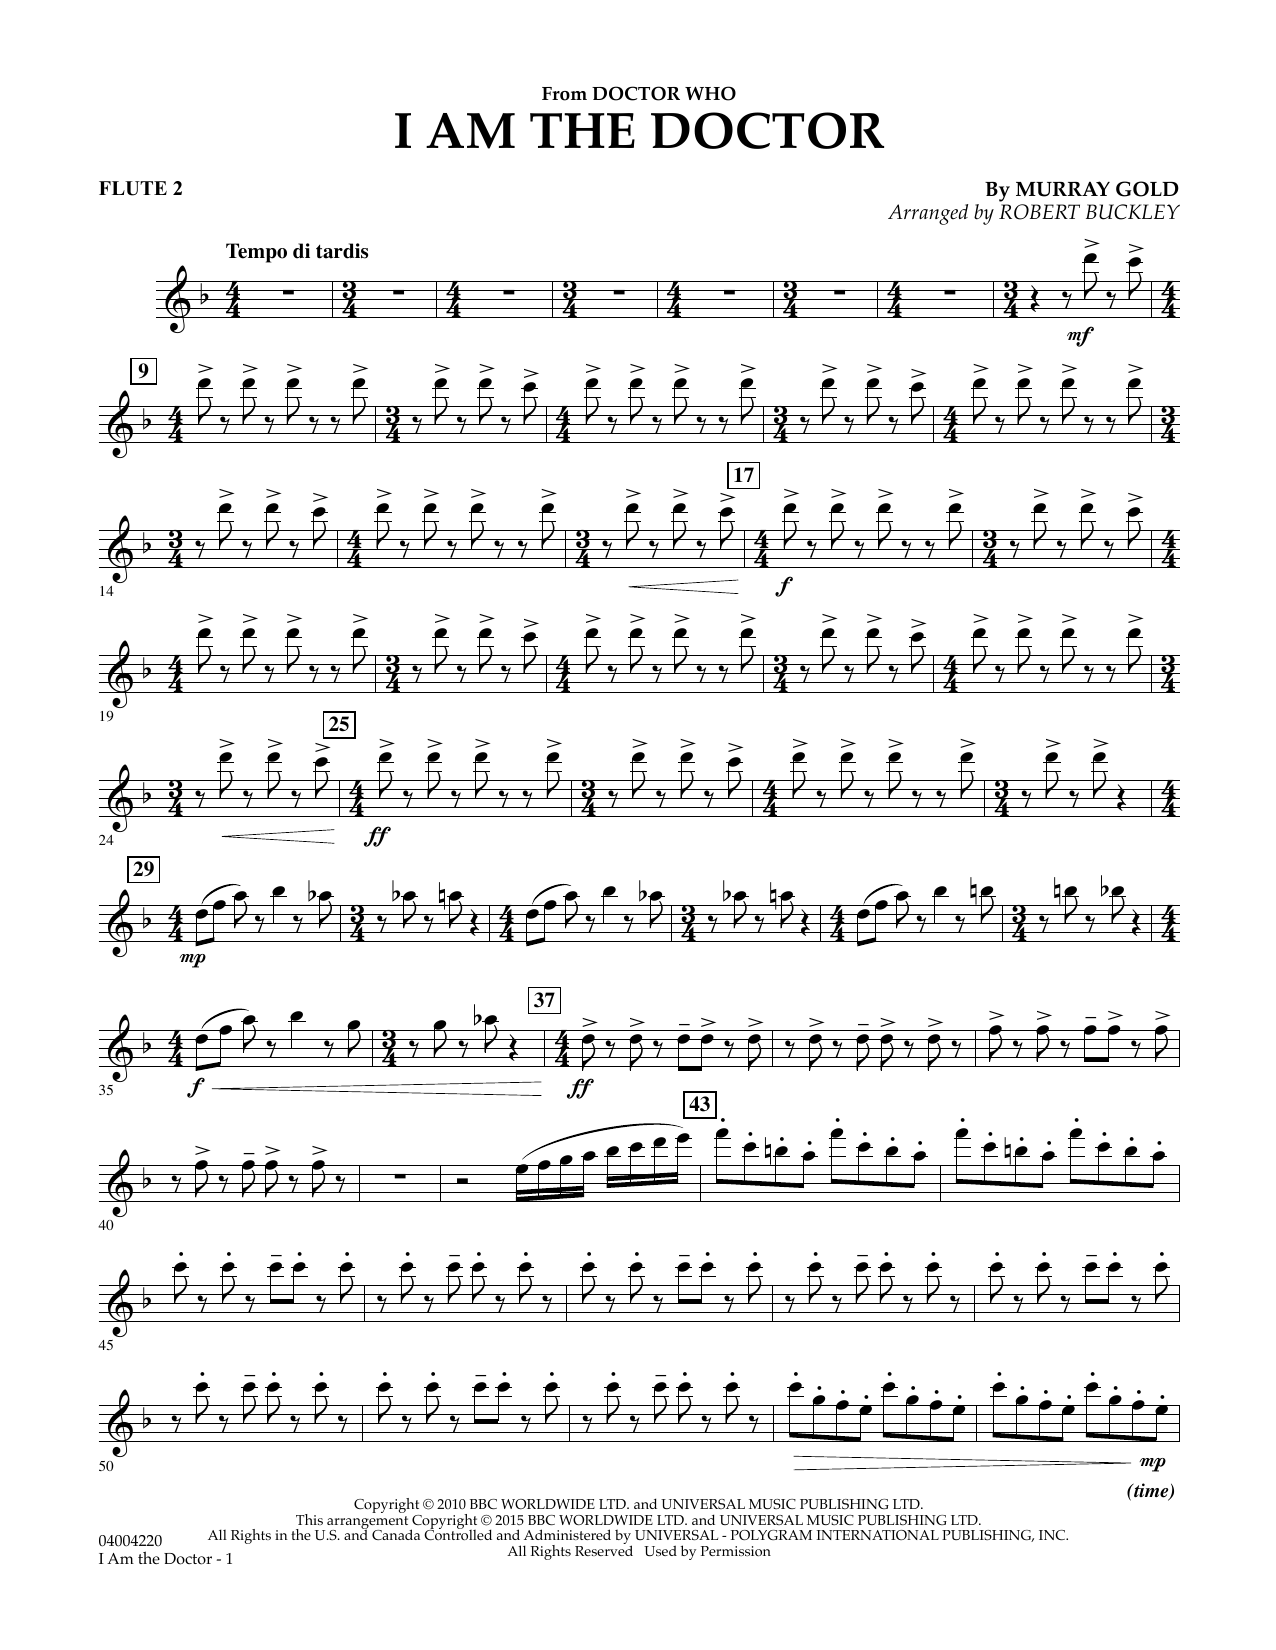 Robert Buckley I Am the Doctor (from Doctor Who) - Flute 2 sheet music notes and chords. Download Printable PDF.